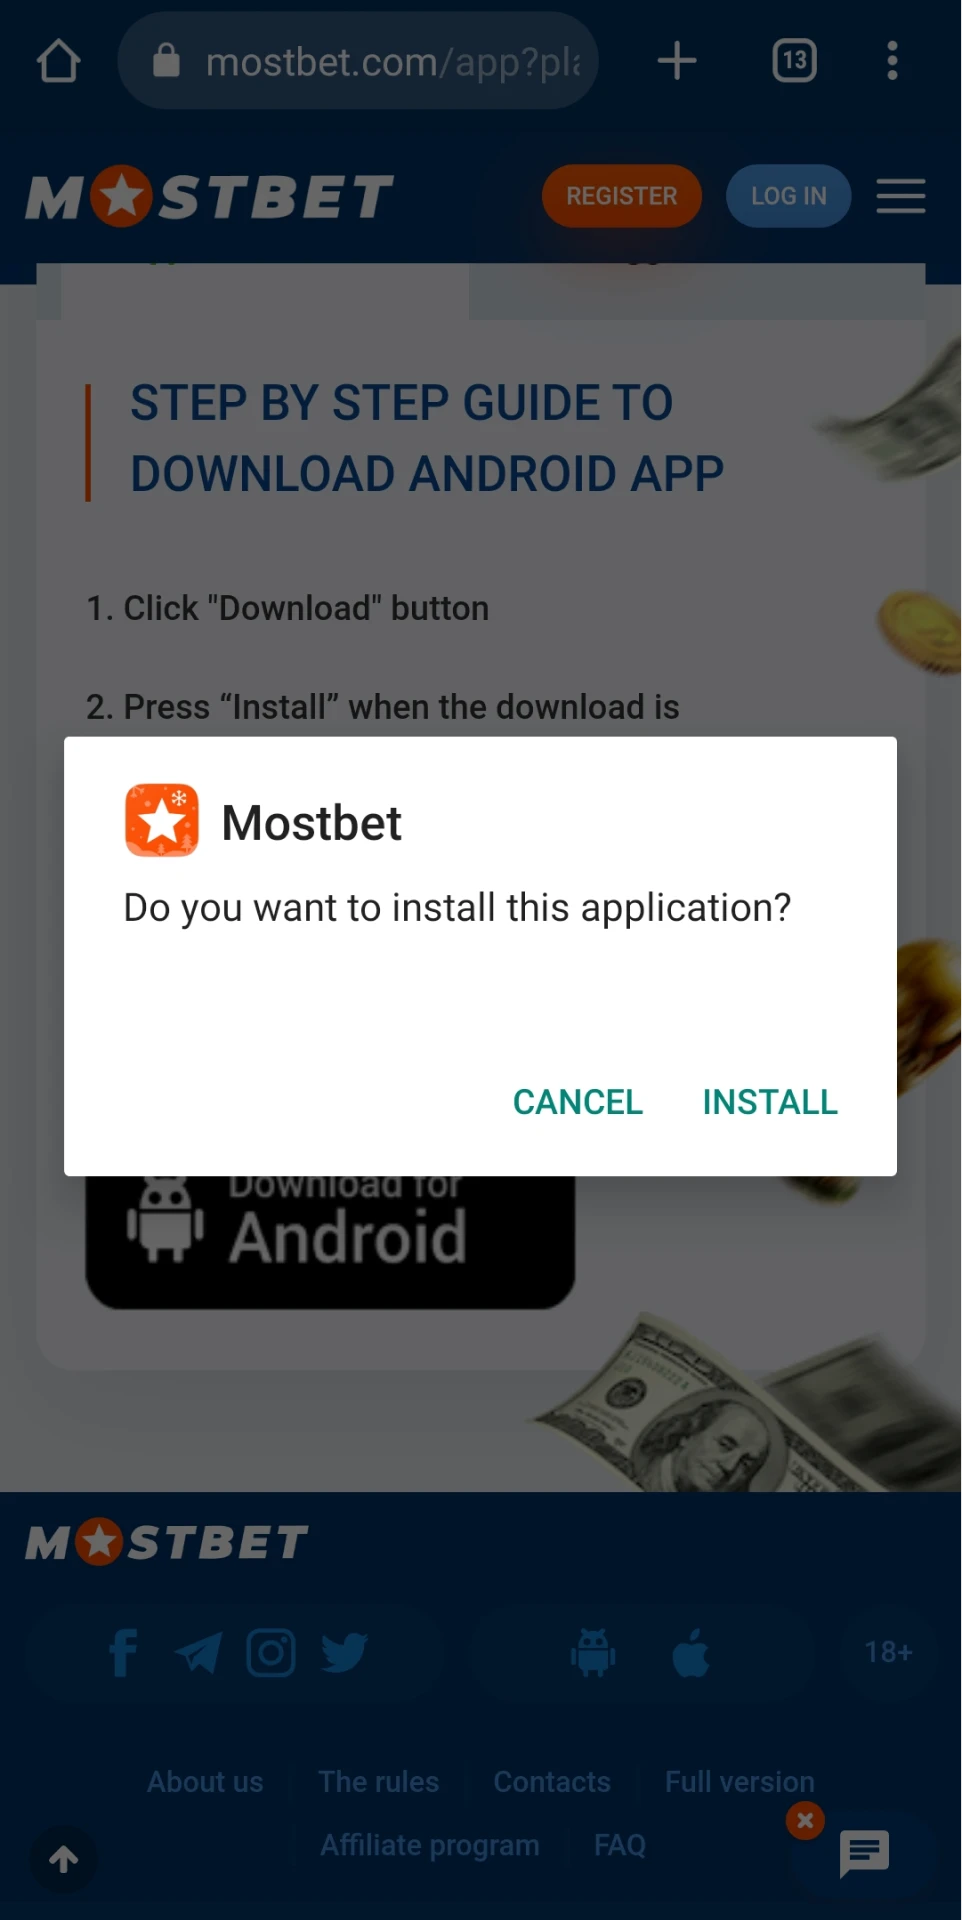 Install the Mostbet application to play Aviator on your phone.